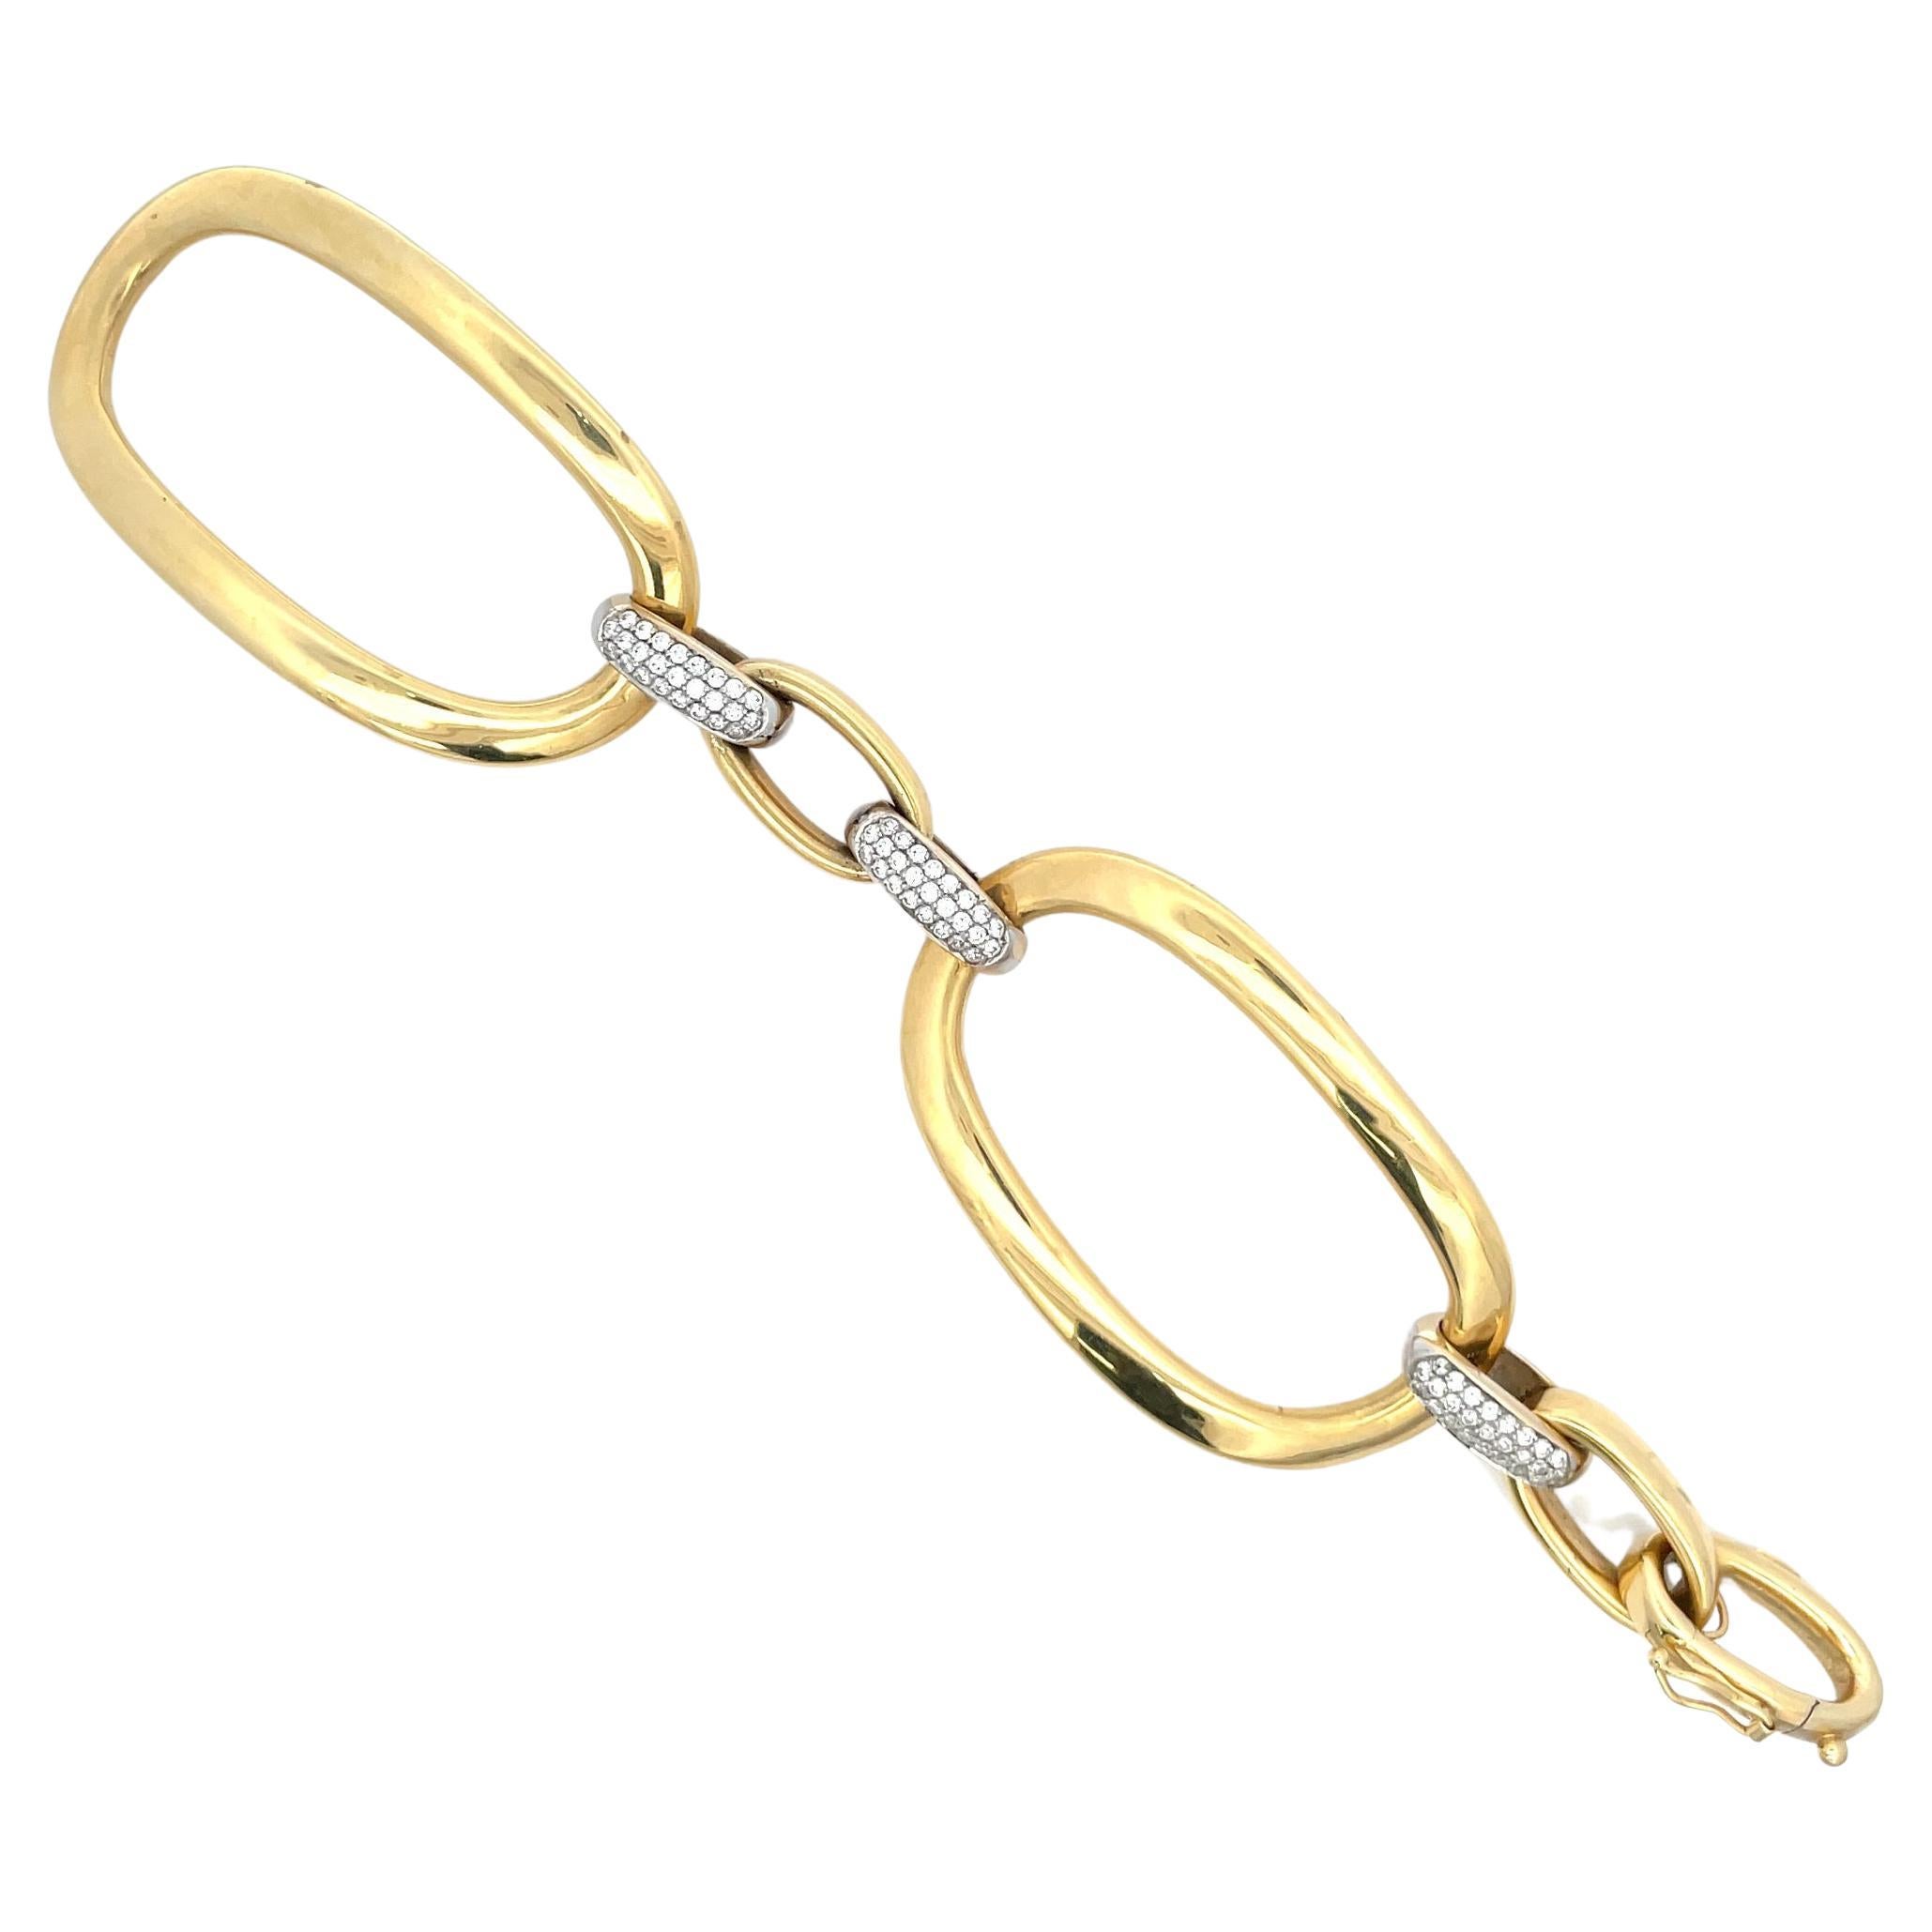 18 Karat Yellow Gold link bracelet featuring two large oval links with 75 diamond accents in between, weighing approximately 2 Carats. Will fit a short wrist.
Oval links 2.25 inches long x 1.30 inches wide